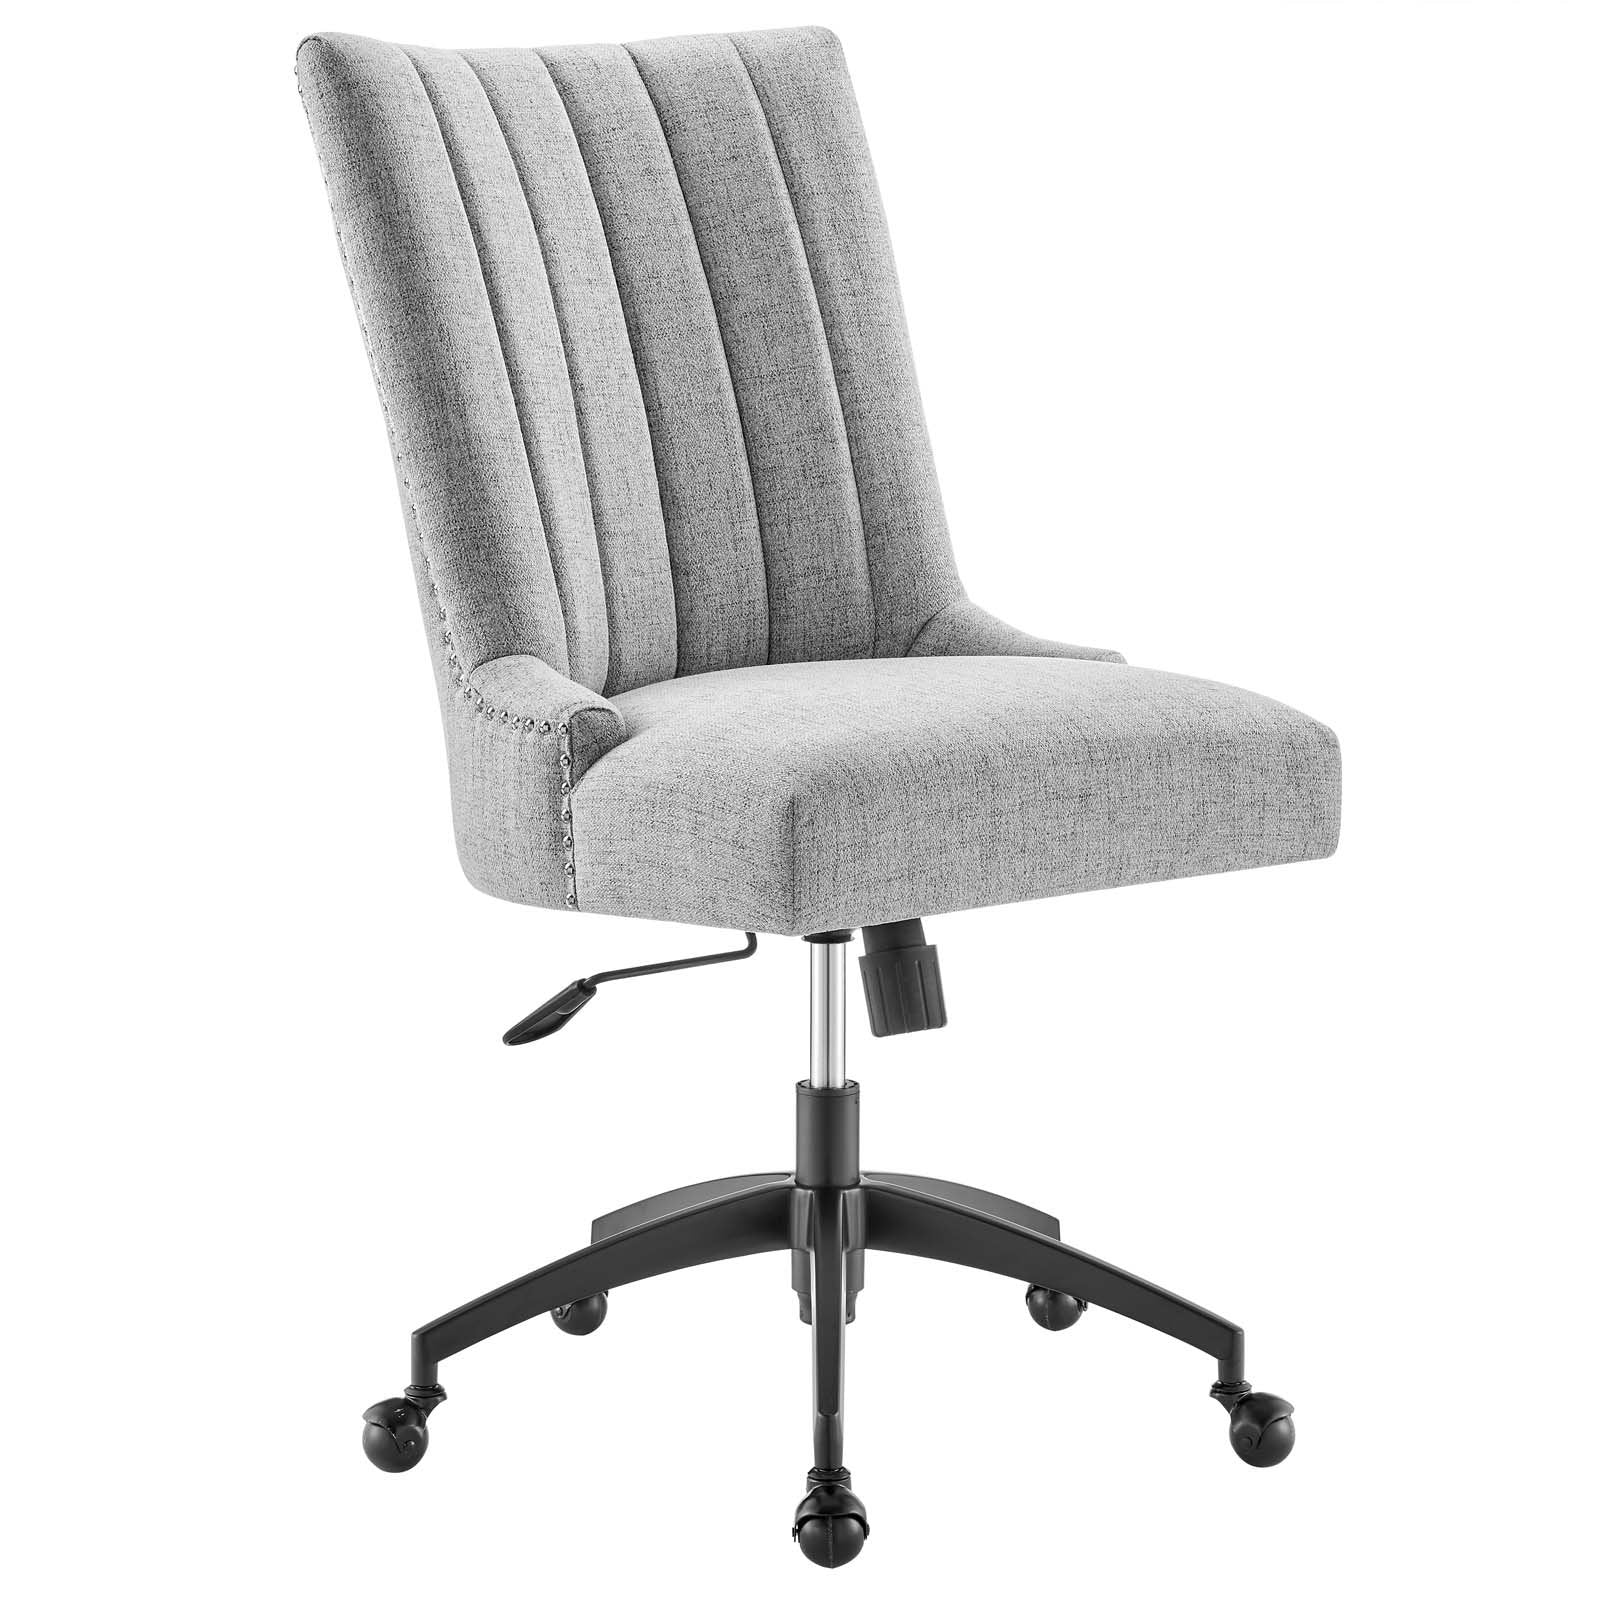 Empower Channel Tufted Fabric Office Chair - East Shore Modern Home Furnishings